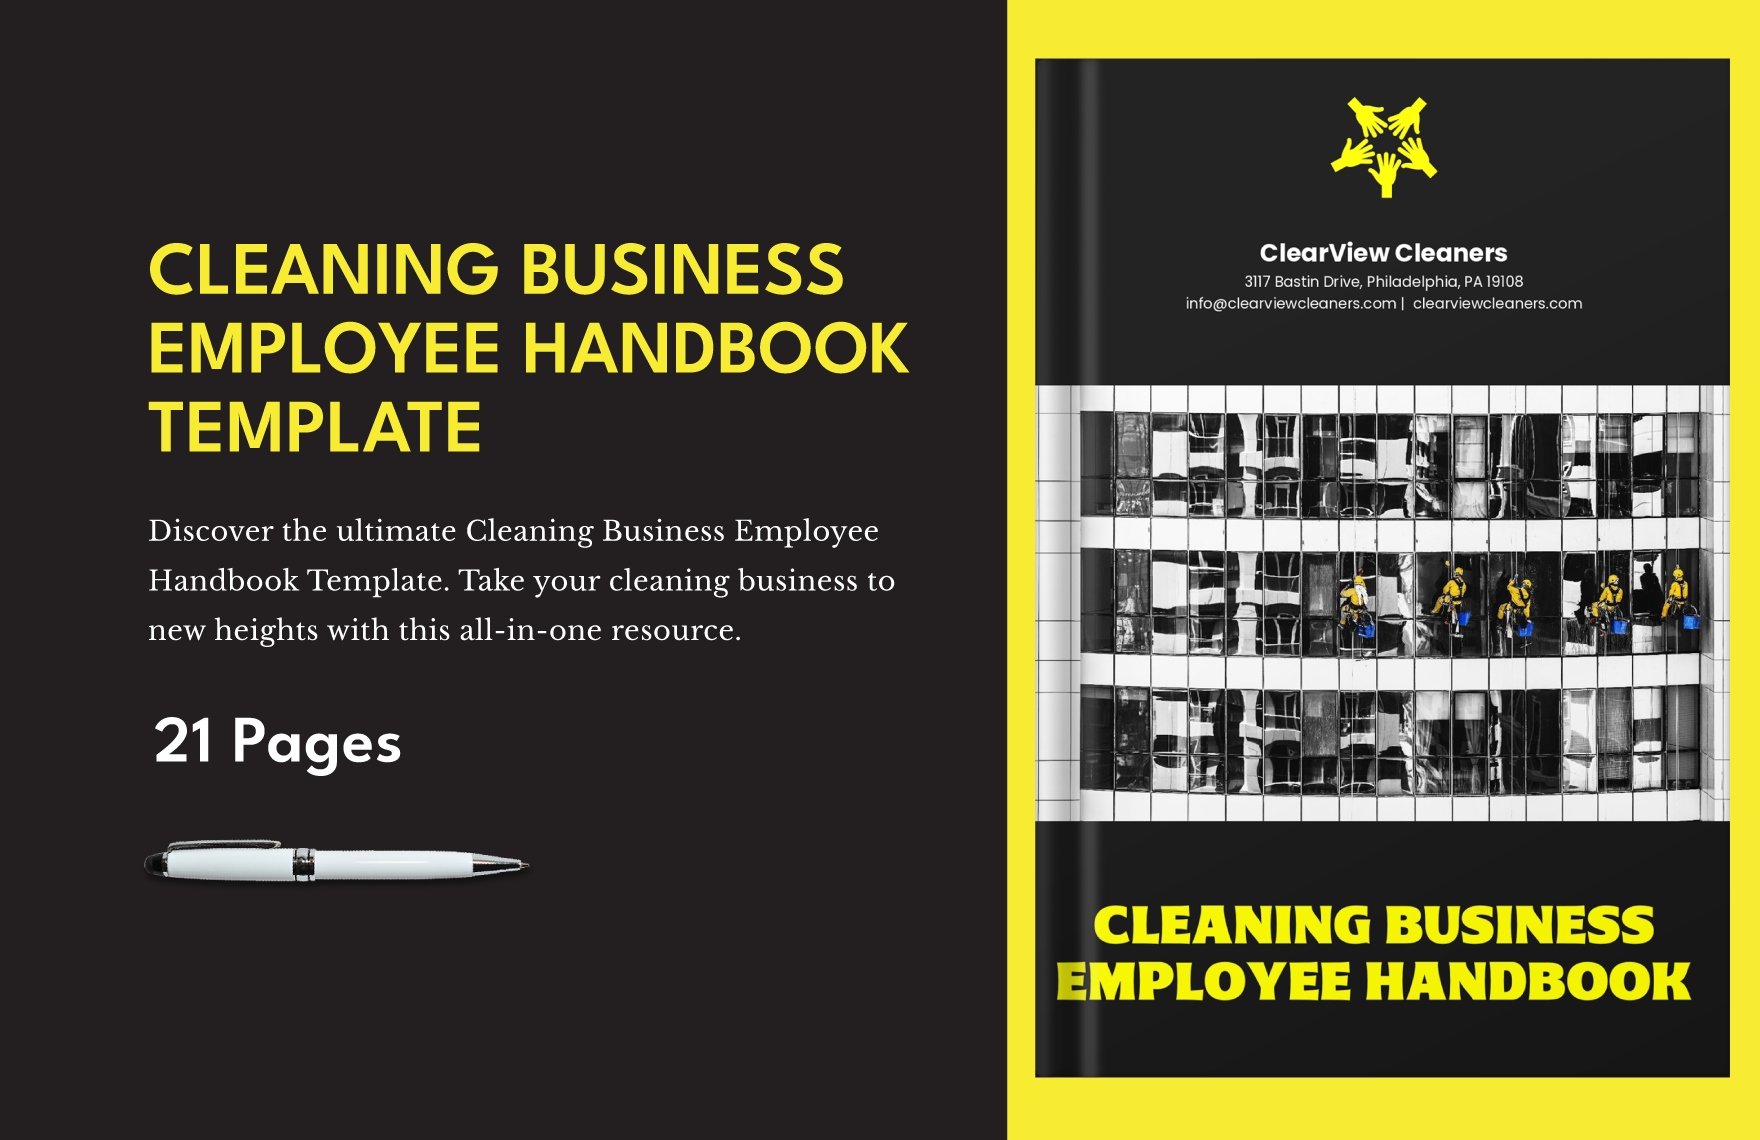 Free Cleaning Business Employee Handbook Template in Word, Google Docs, PDF